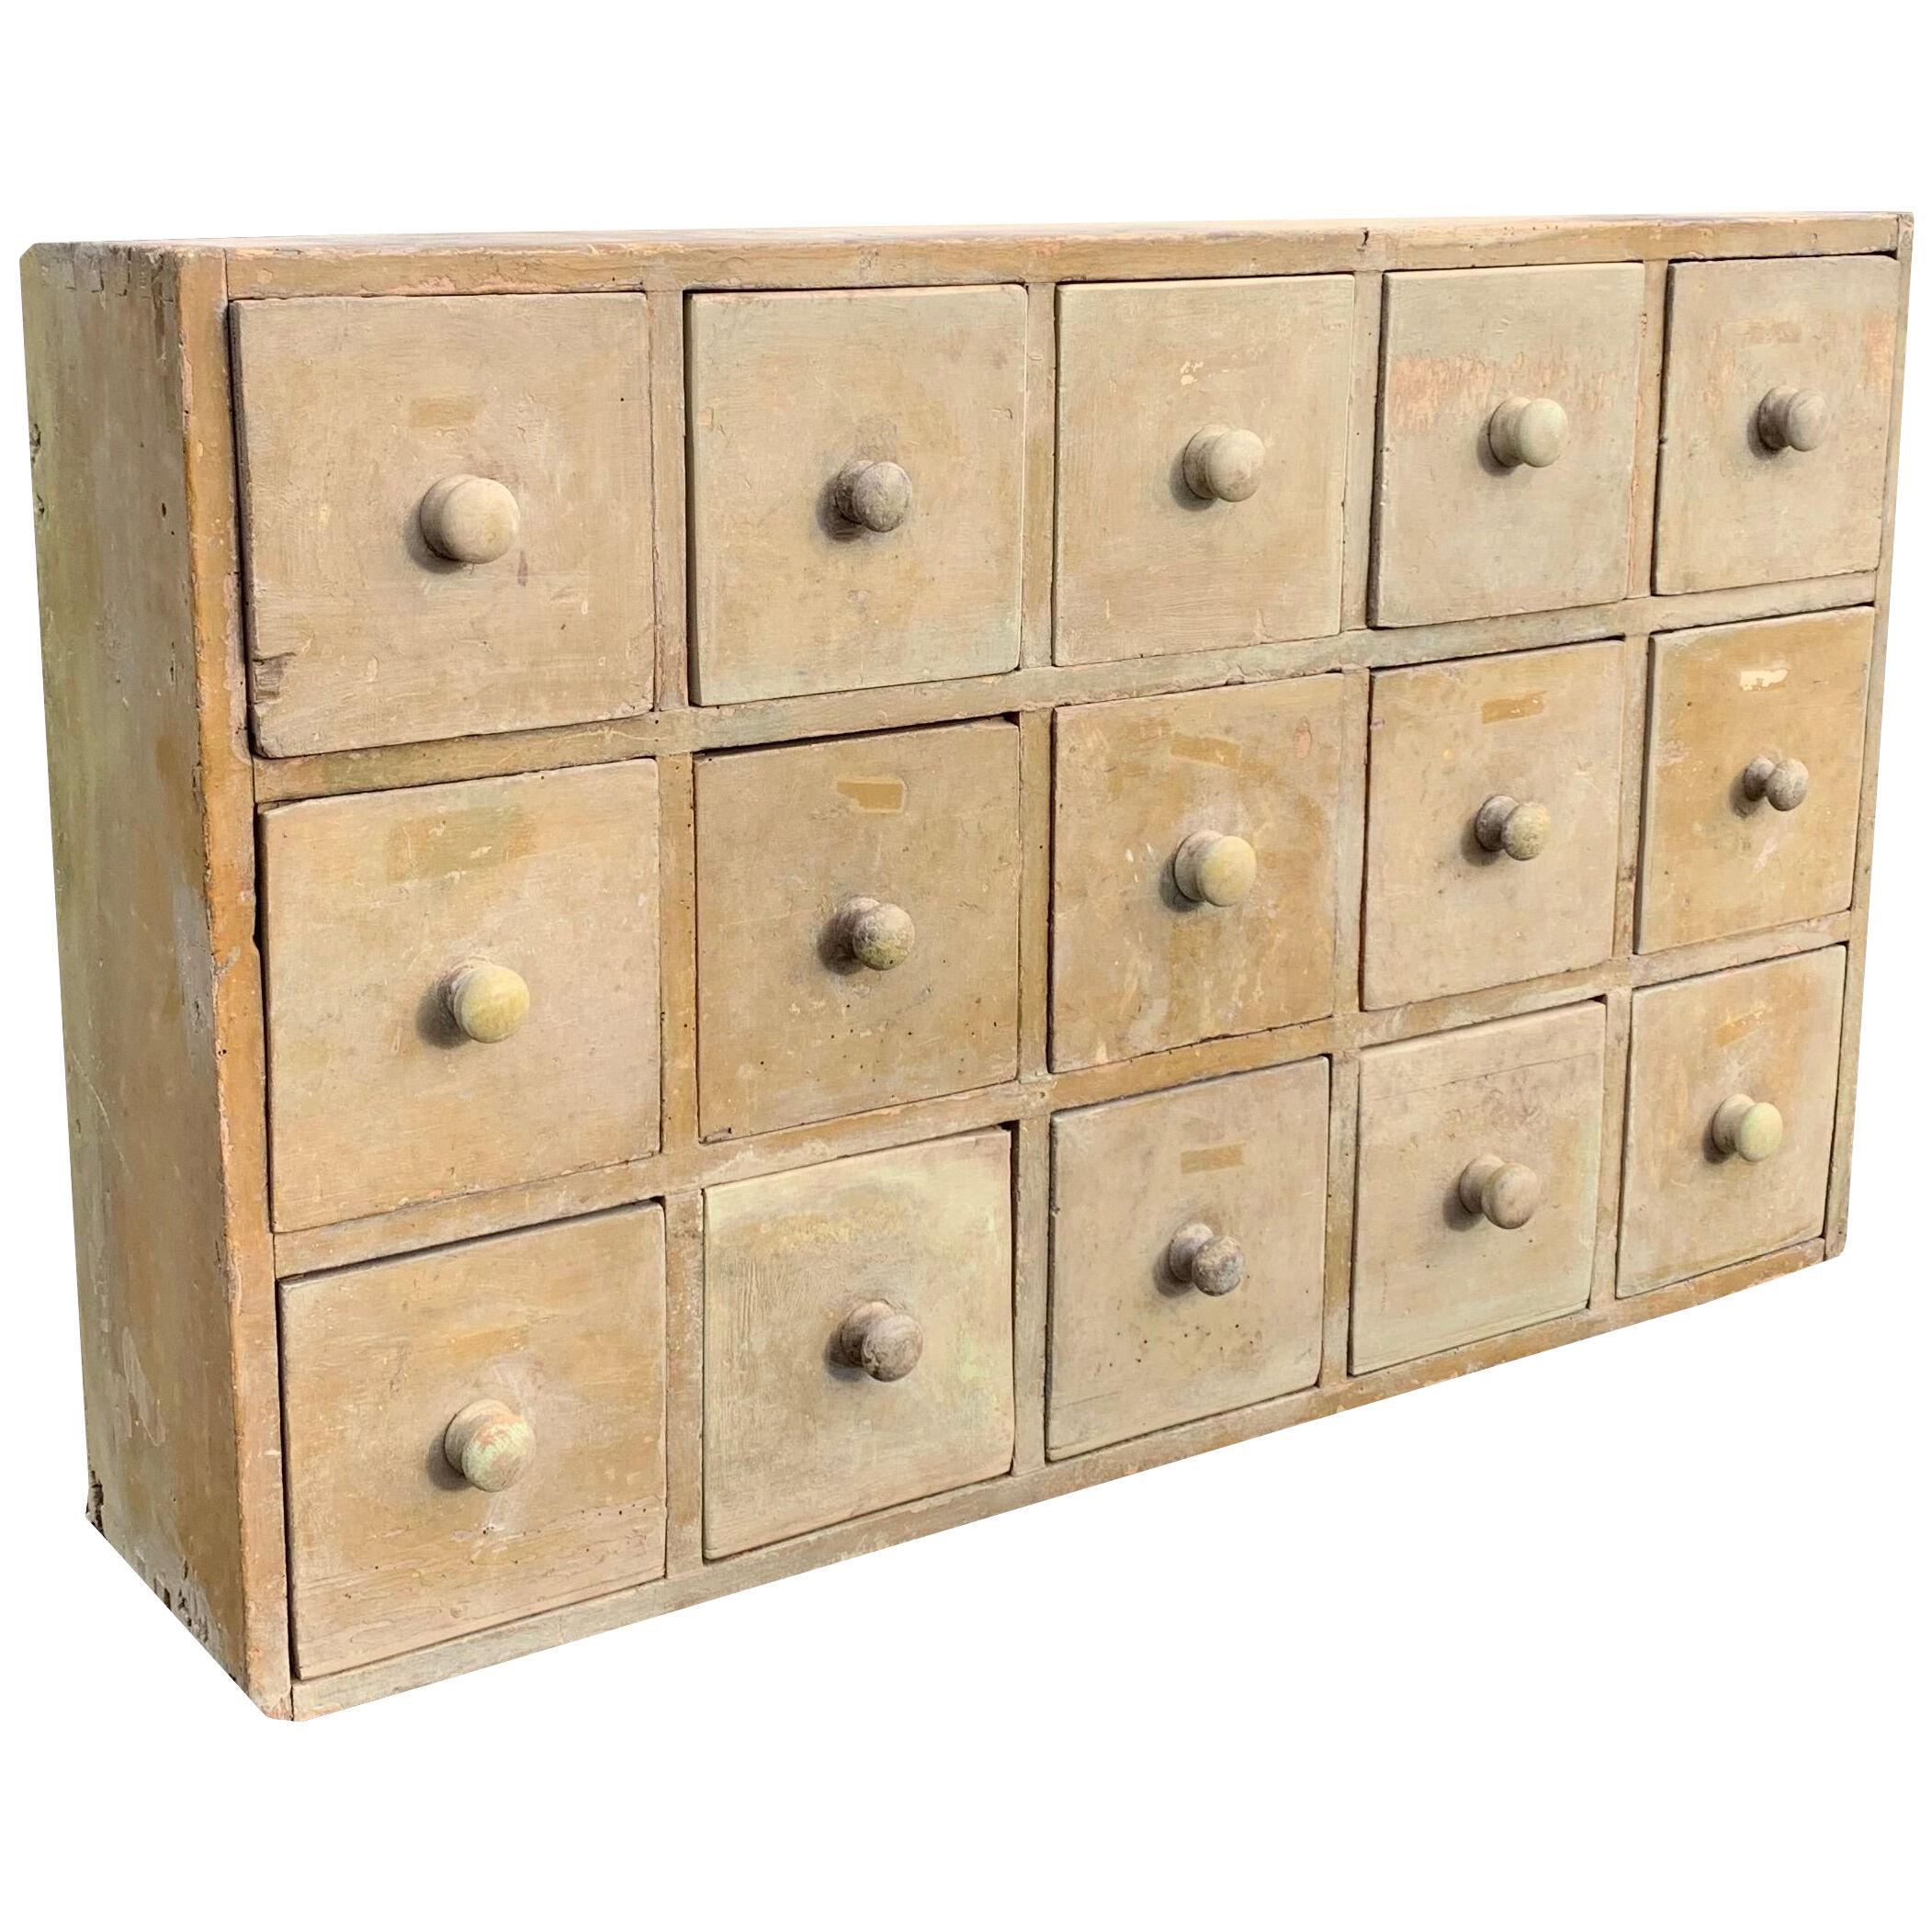 Industrial Bank of Pine Drawers